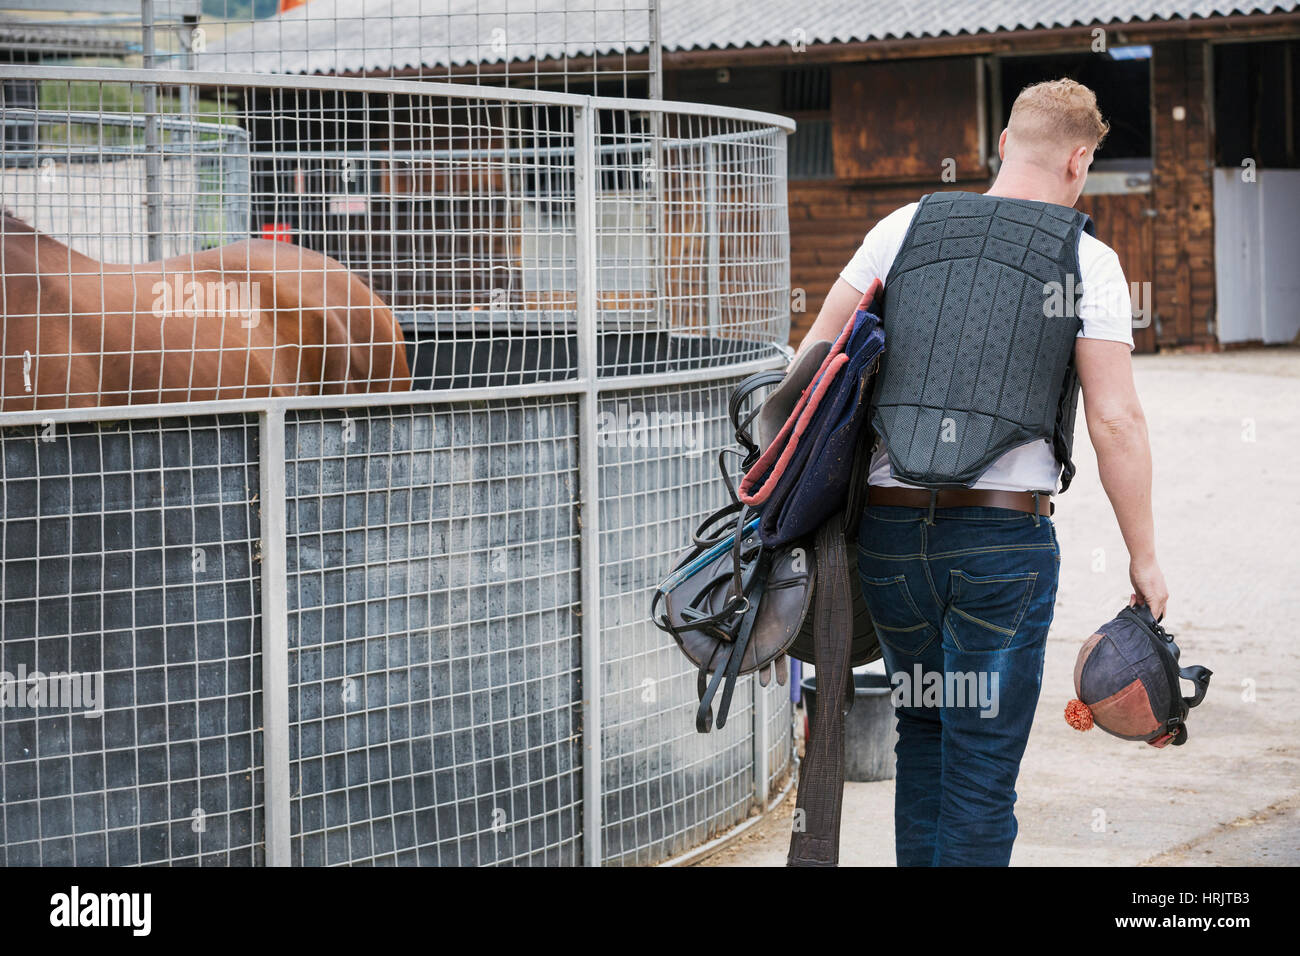 Rear view of a young man wearing a black body protector, and carrying riding gear at a riding stable. Stock Photo